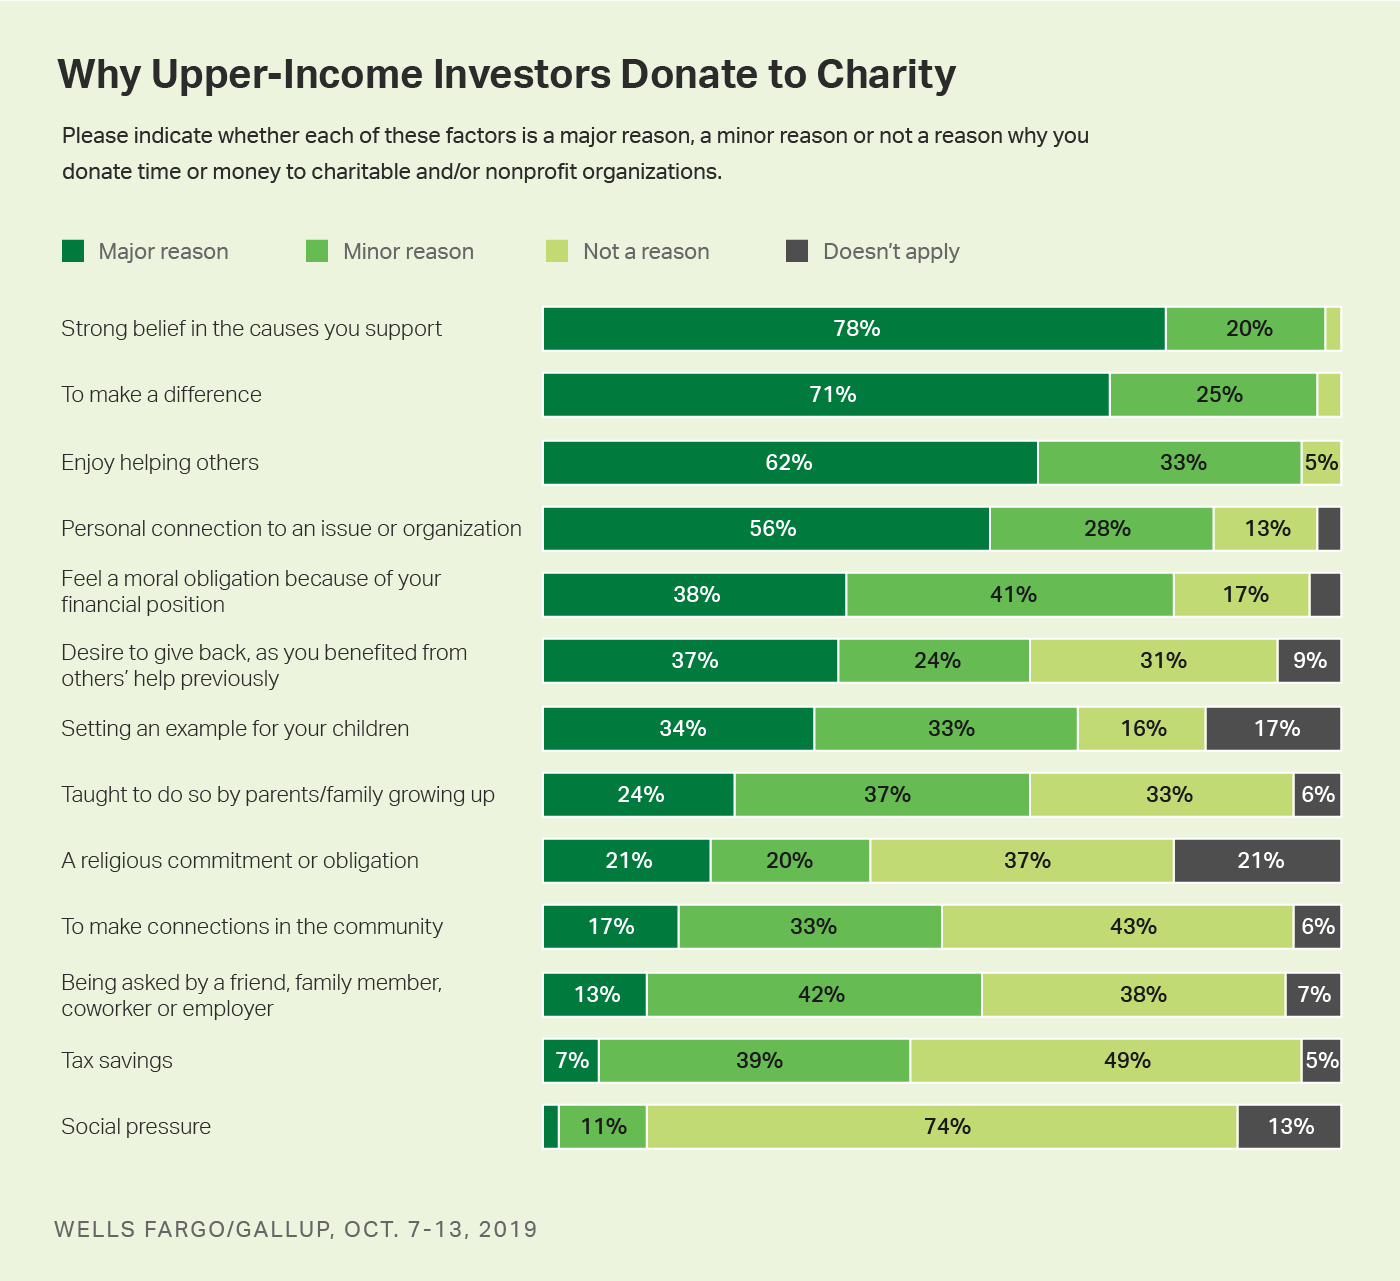 Bar chart. How much of a factor upper-income investors consider 13 elements to be in their decision to donate time or money.